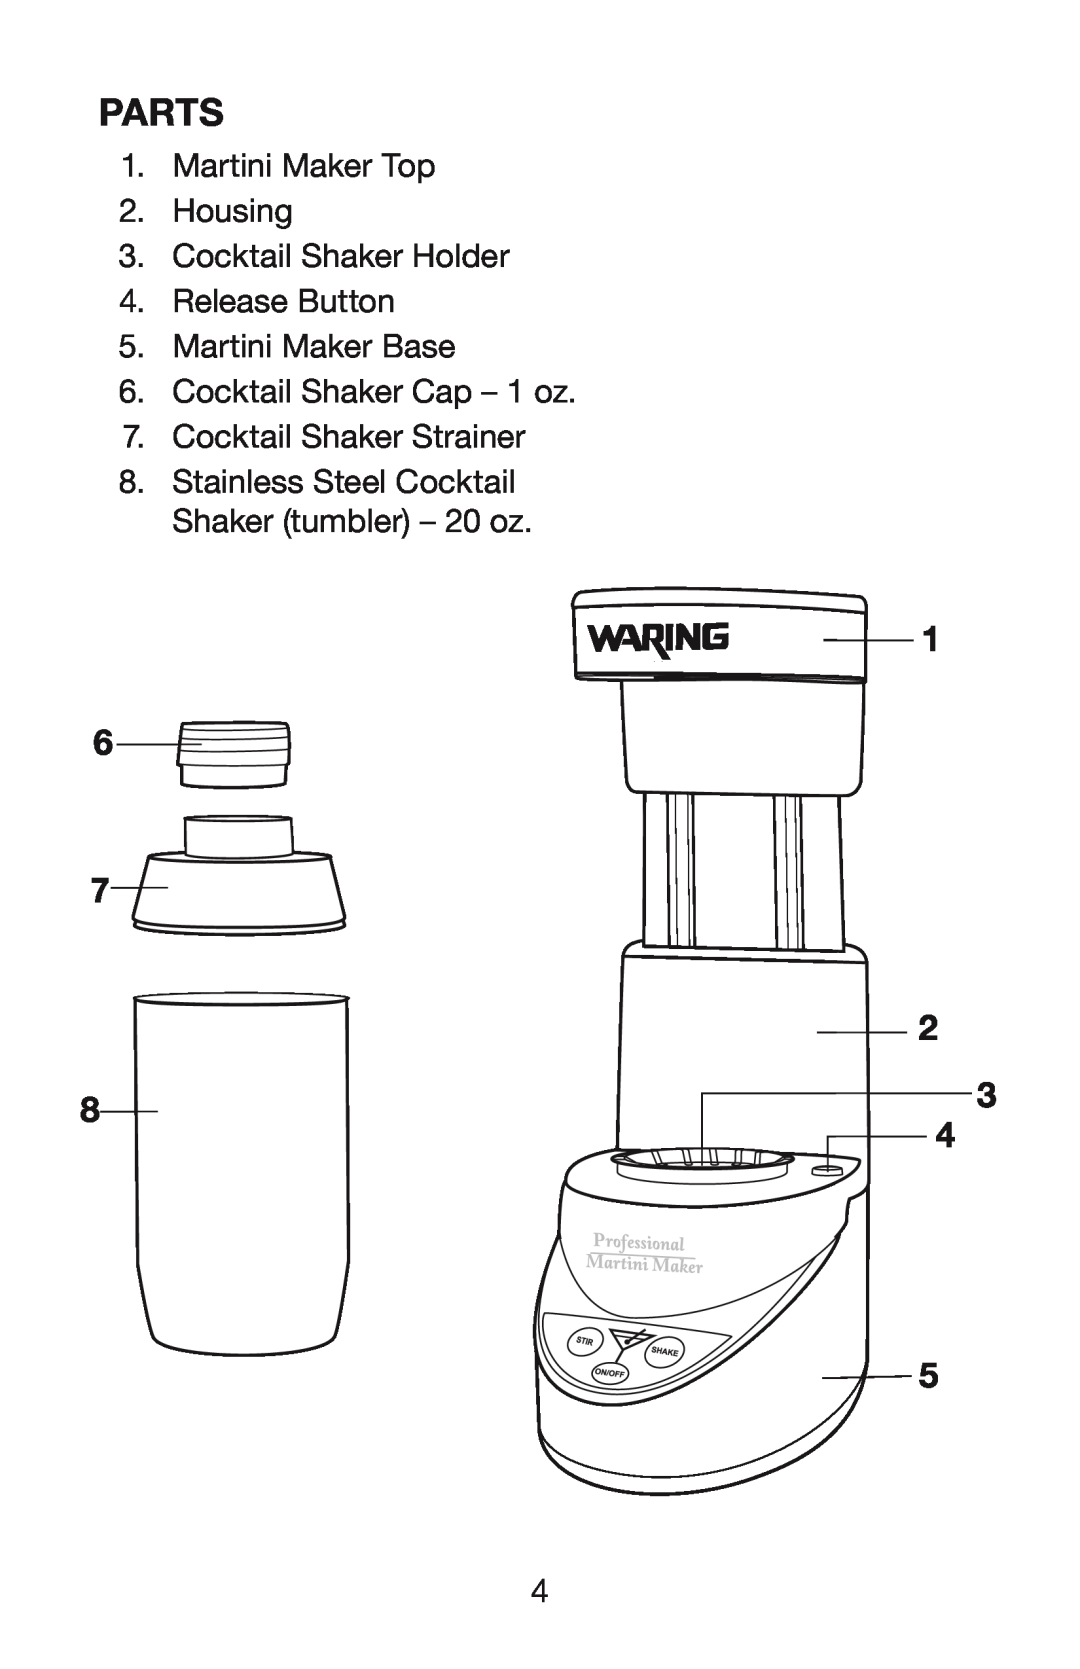 Waring WM007 manual Parts, Martini Maker Top 2.Housing, Cocktail Shaker Holder 4.Release Button, Cocktail Shaker Strainer 